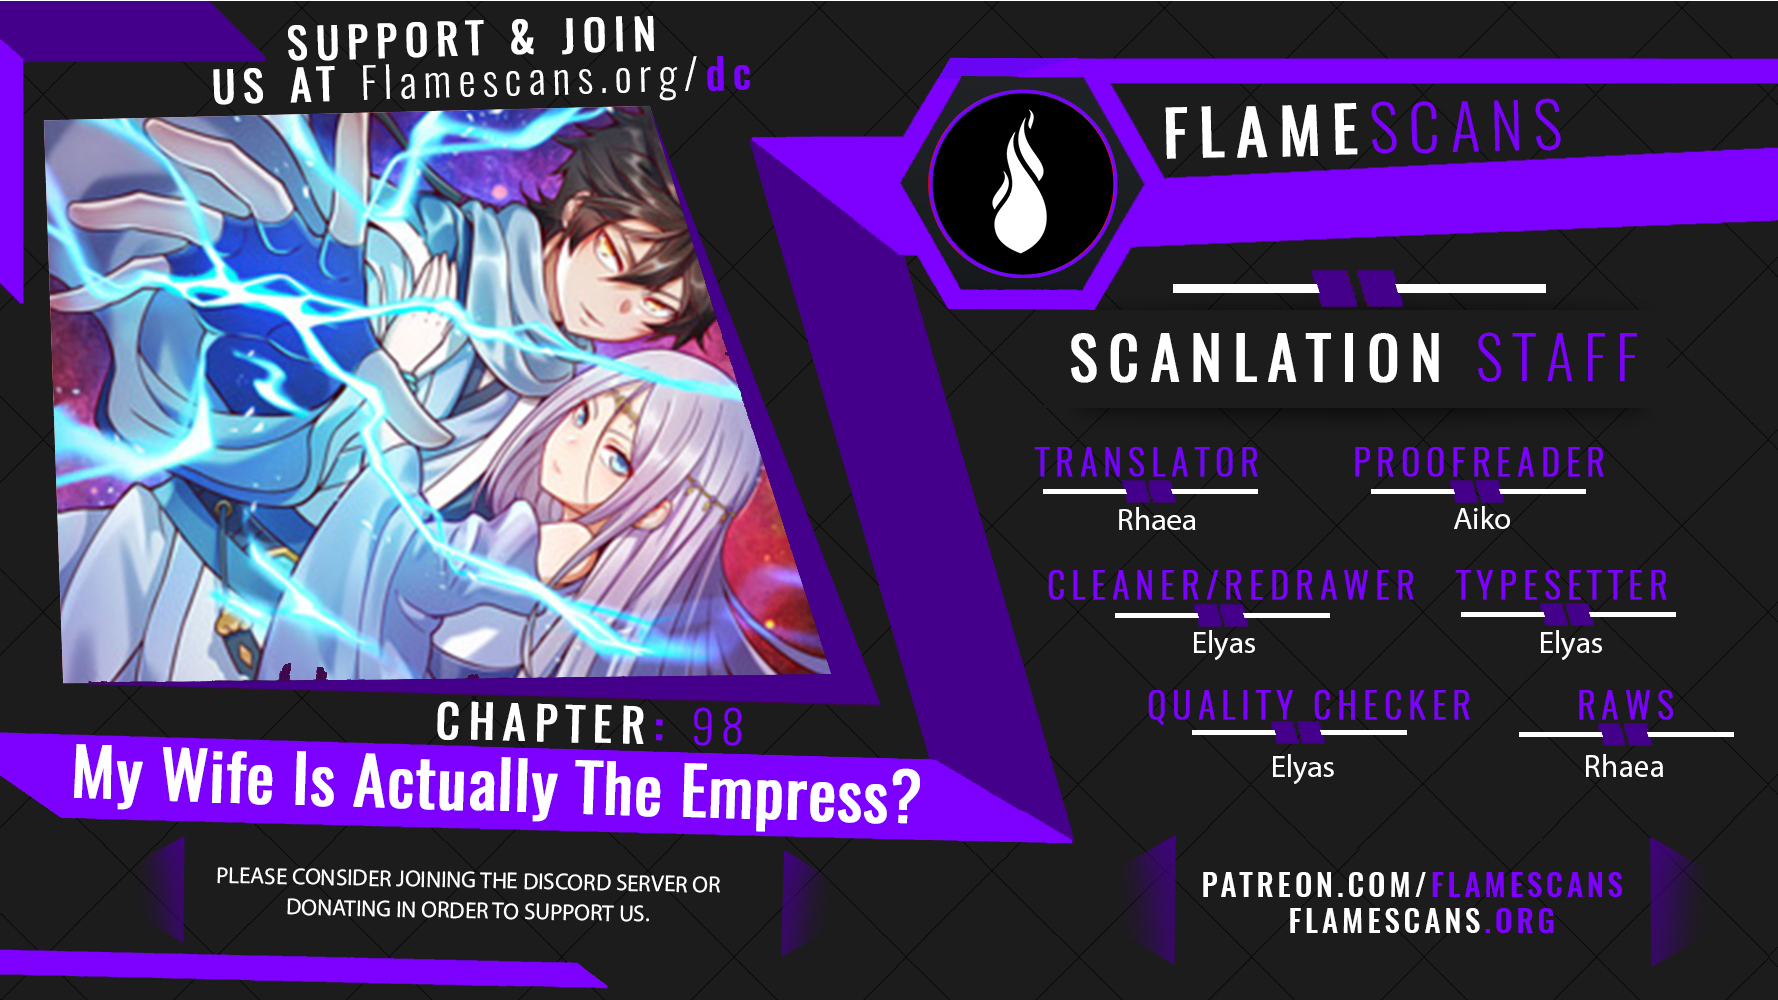 My Wife Is Actually The Empress? - Chapter 20964 - Image 1